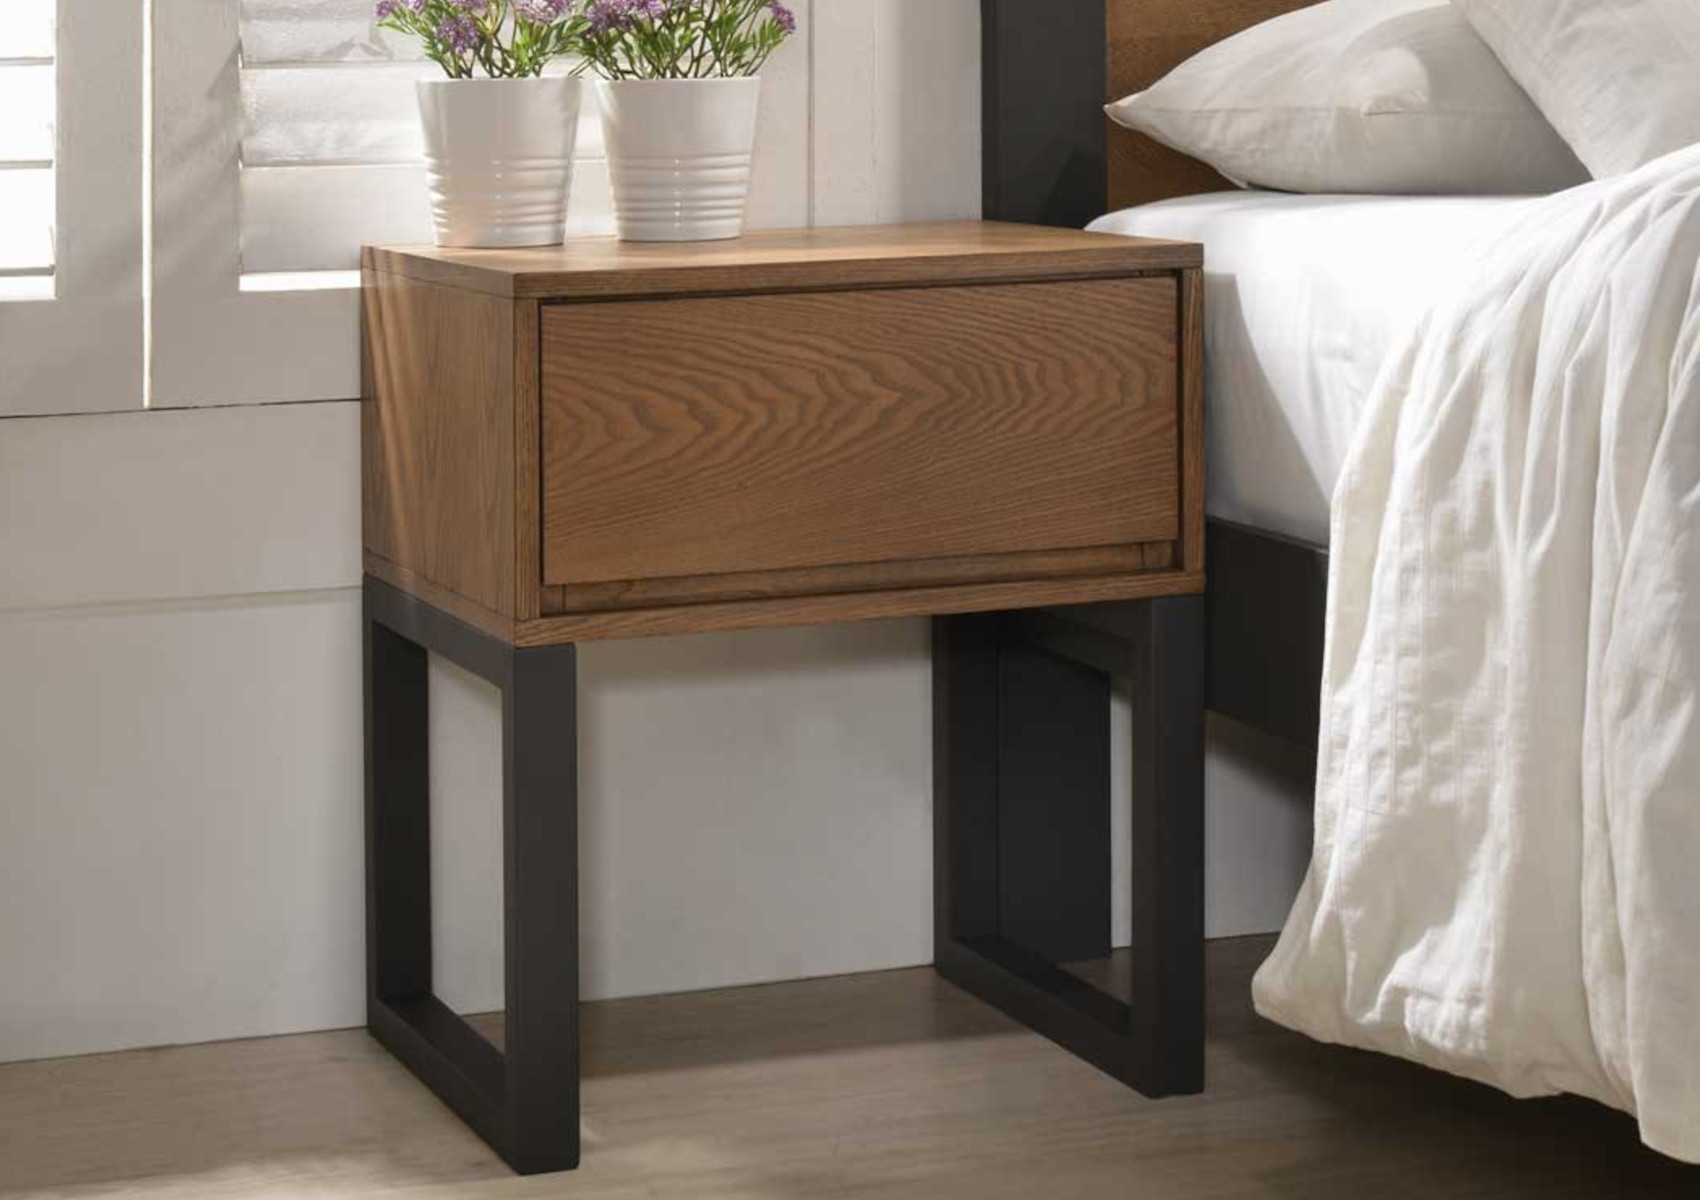 View Harmony Olivia 1 Drawer Bedside WoodenCharcoal Time4Sleep information